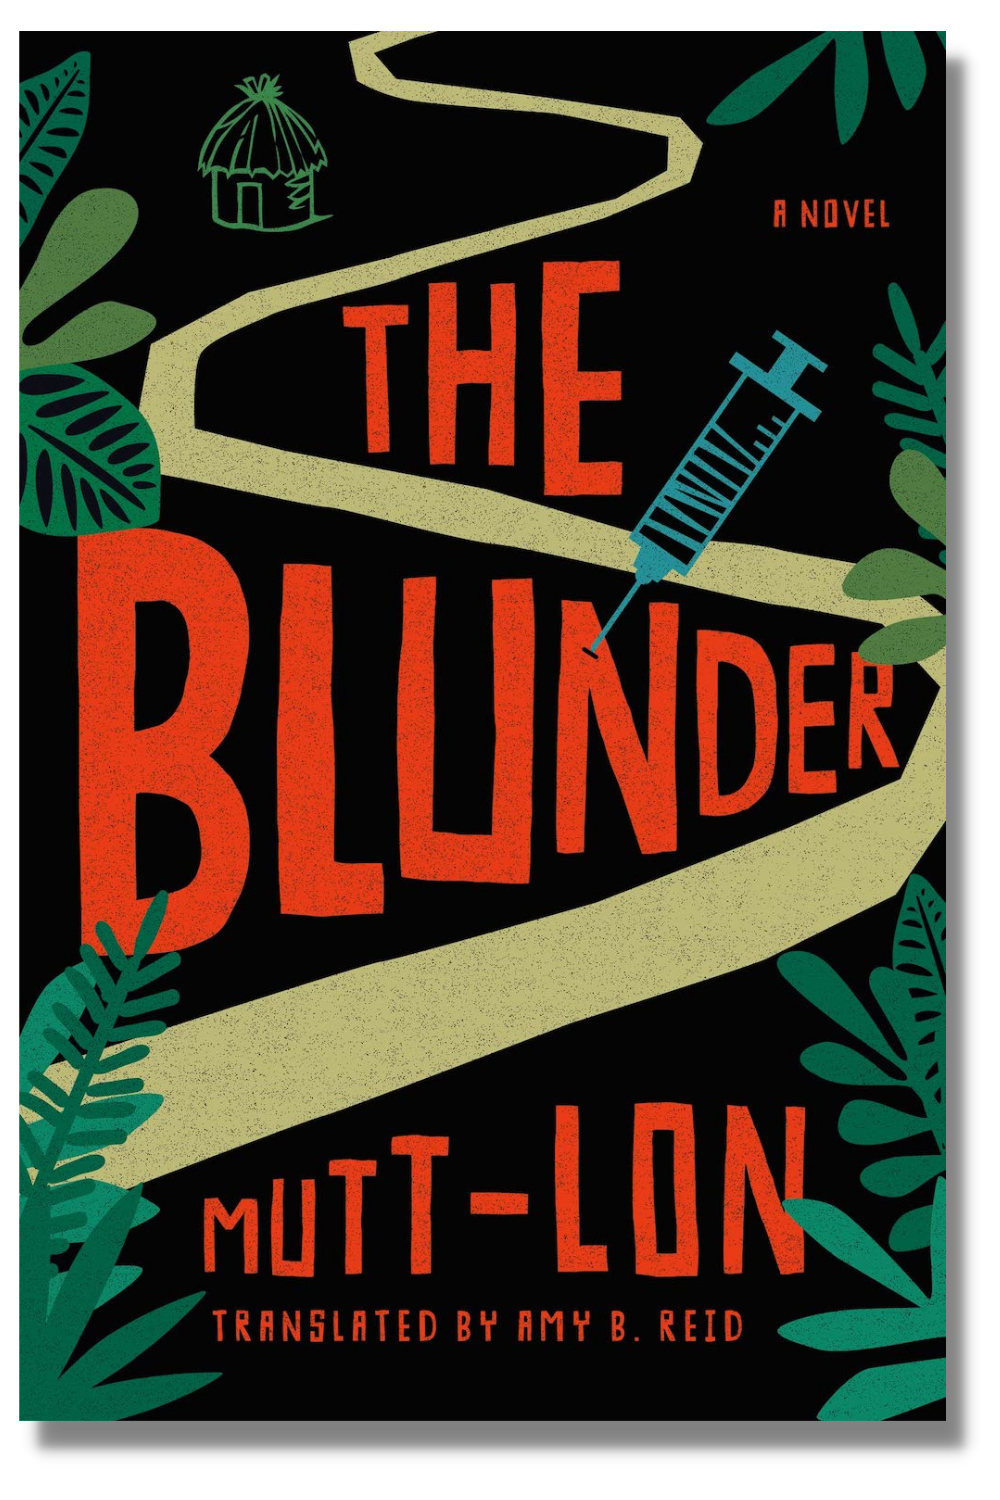 The cover of "The Blunder" by Mutt-Lon, tr. Amy B. Reid